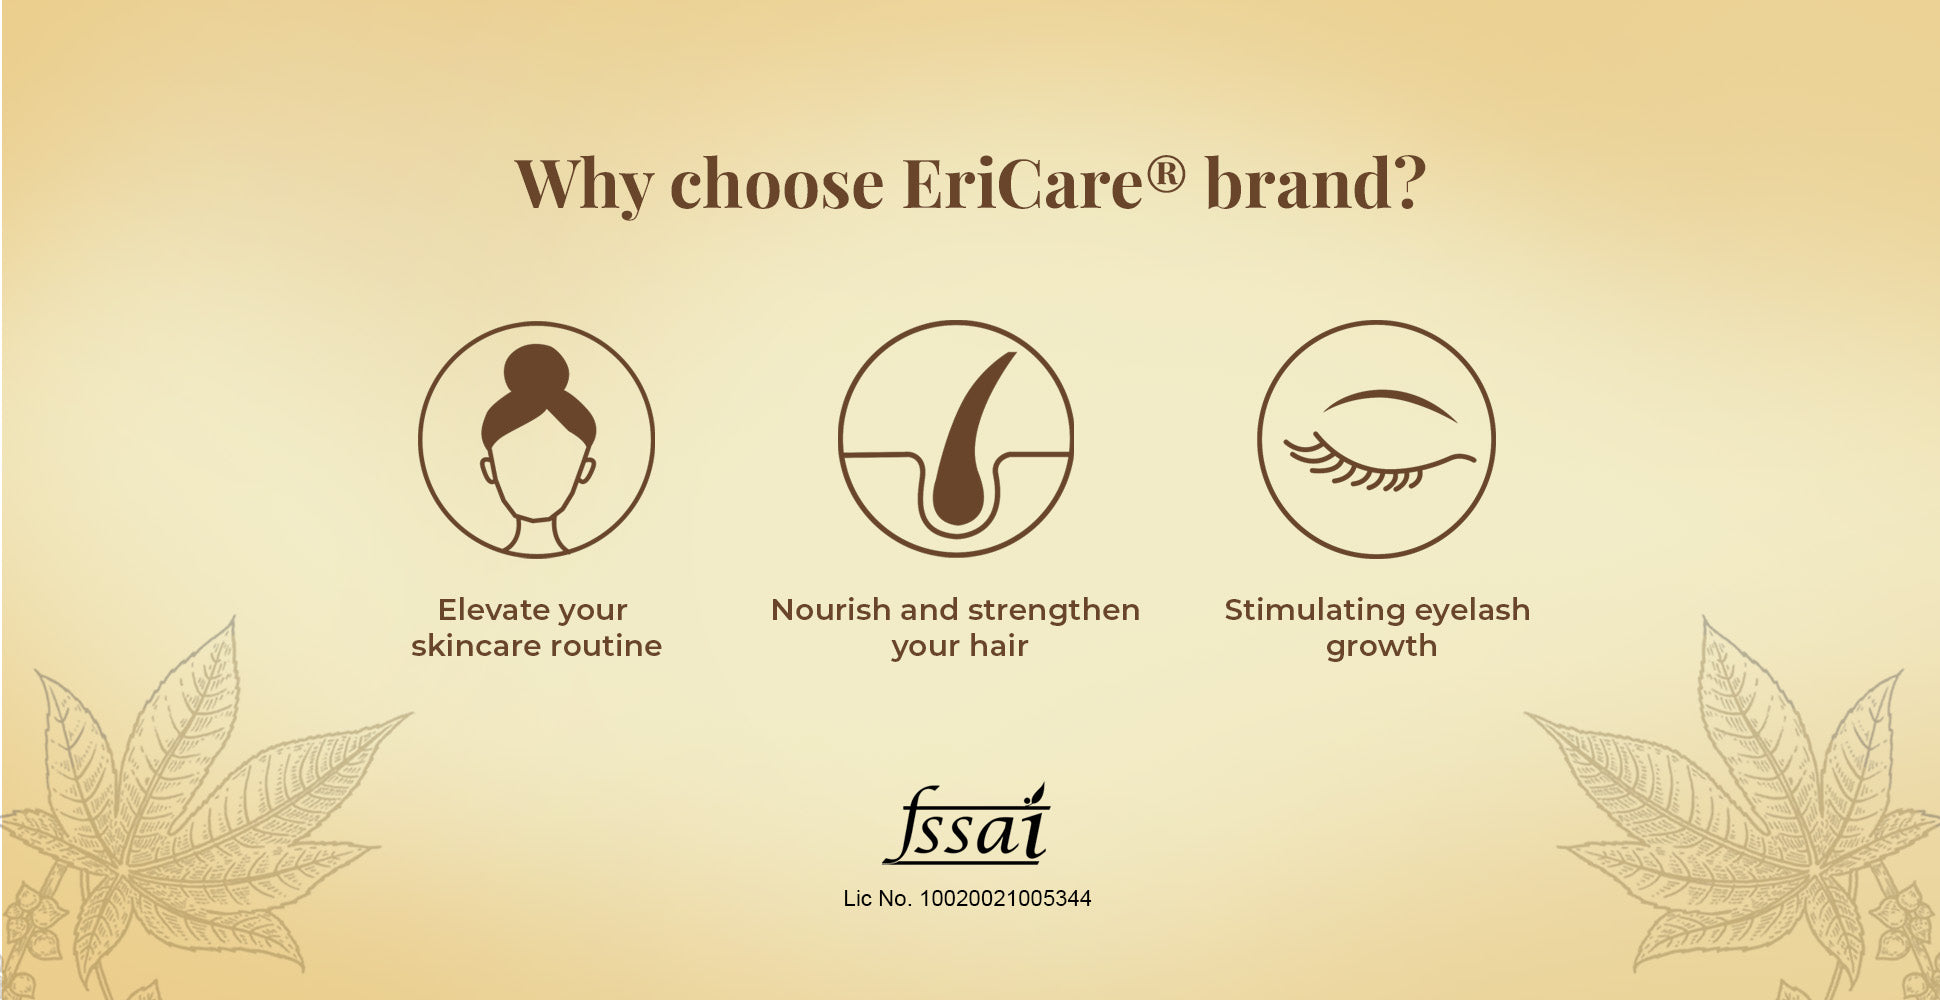 Image of Why choose EriCare Certified Organic Castor Oil for clear skincare routine, nourishing and strengthening your hair and stimulating eyelashes growth